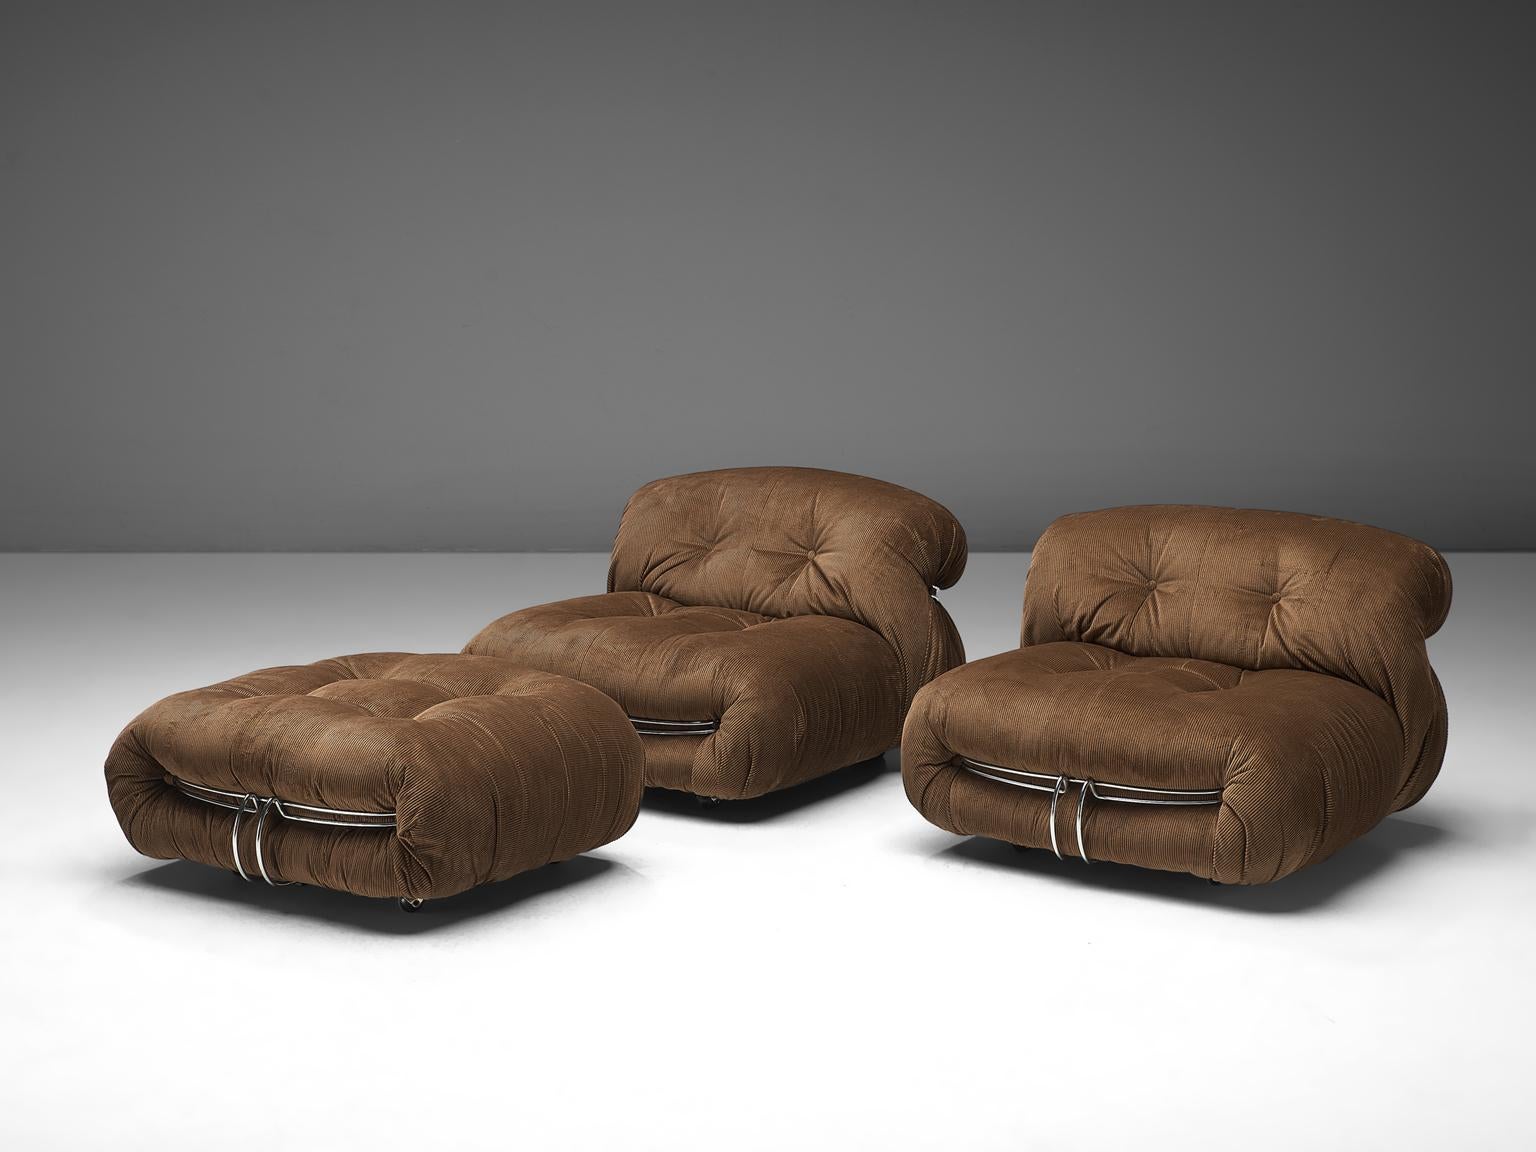 Italian For Jessica: Scarpa Set of 'Soriana' Lounge Chairs with Ottomans 2/2